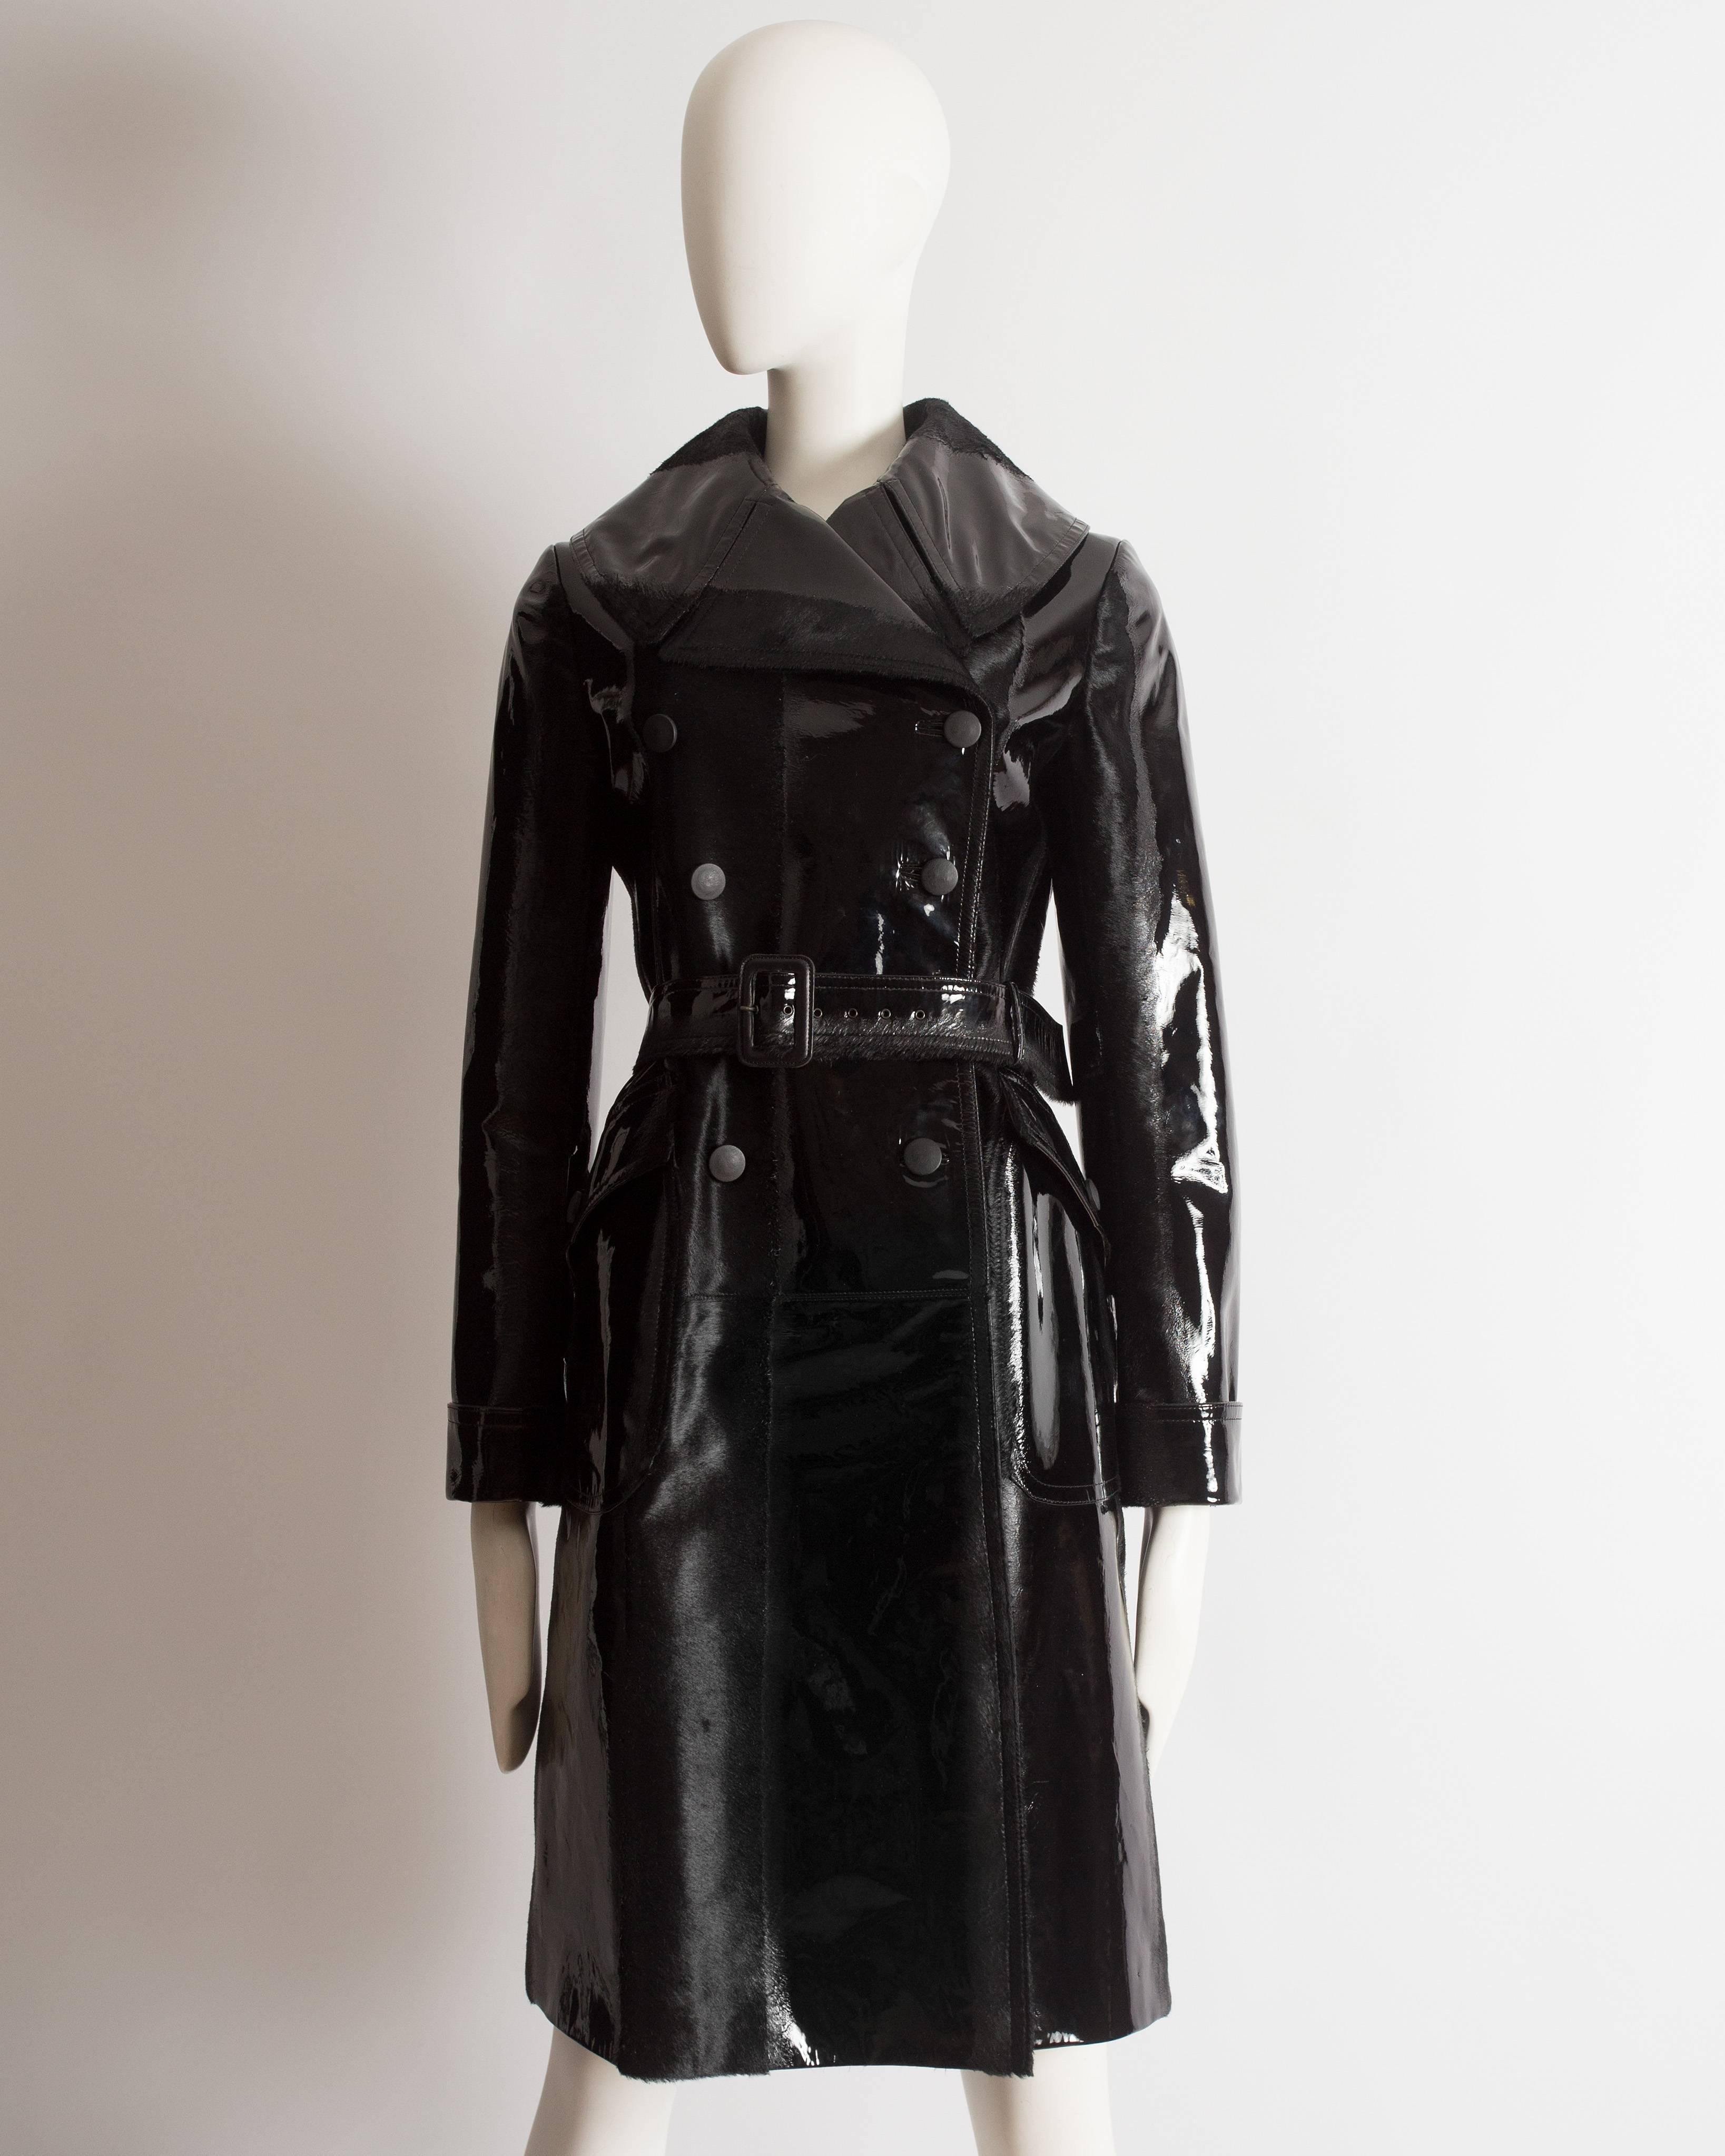 Presenting an exceptional Azzedine Alaia trench coat, a true collector's gem from the autumn-winter 2014 collection. This trench coat showcases the legendary designer's unparalleled artistry and craftsmanship.

Constructed from pony hair sourced